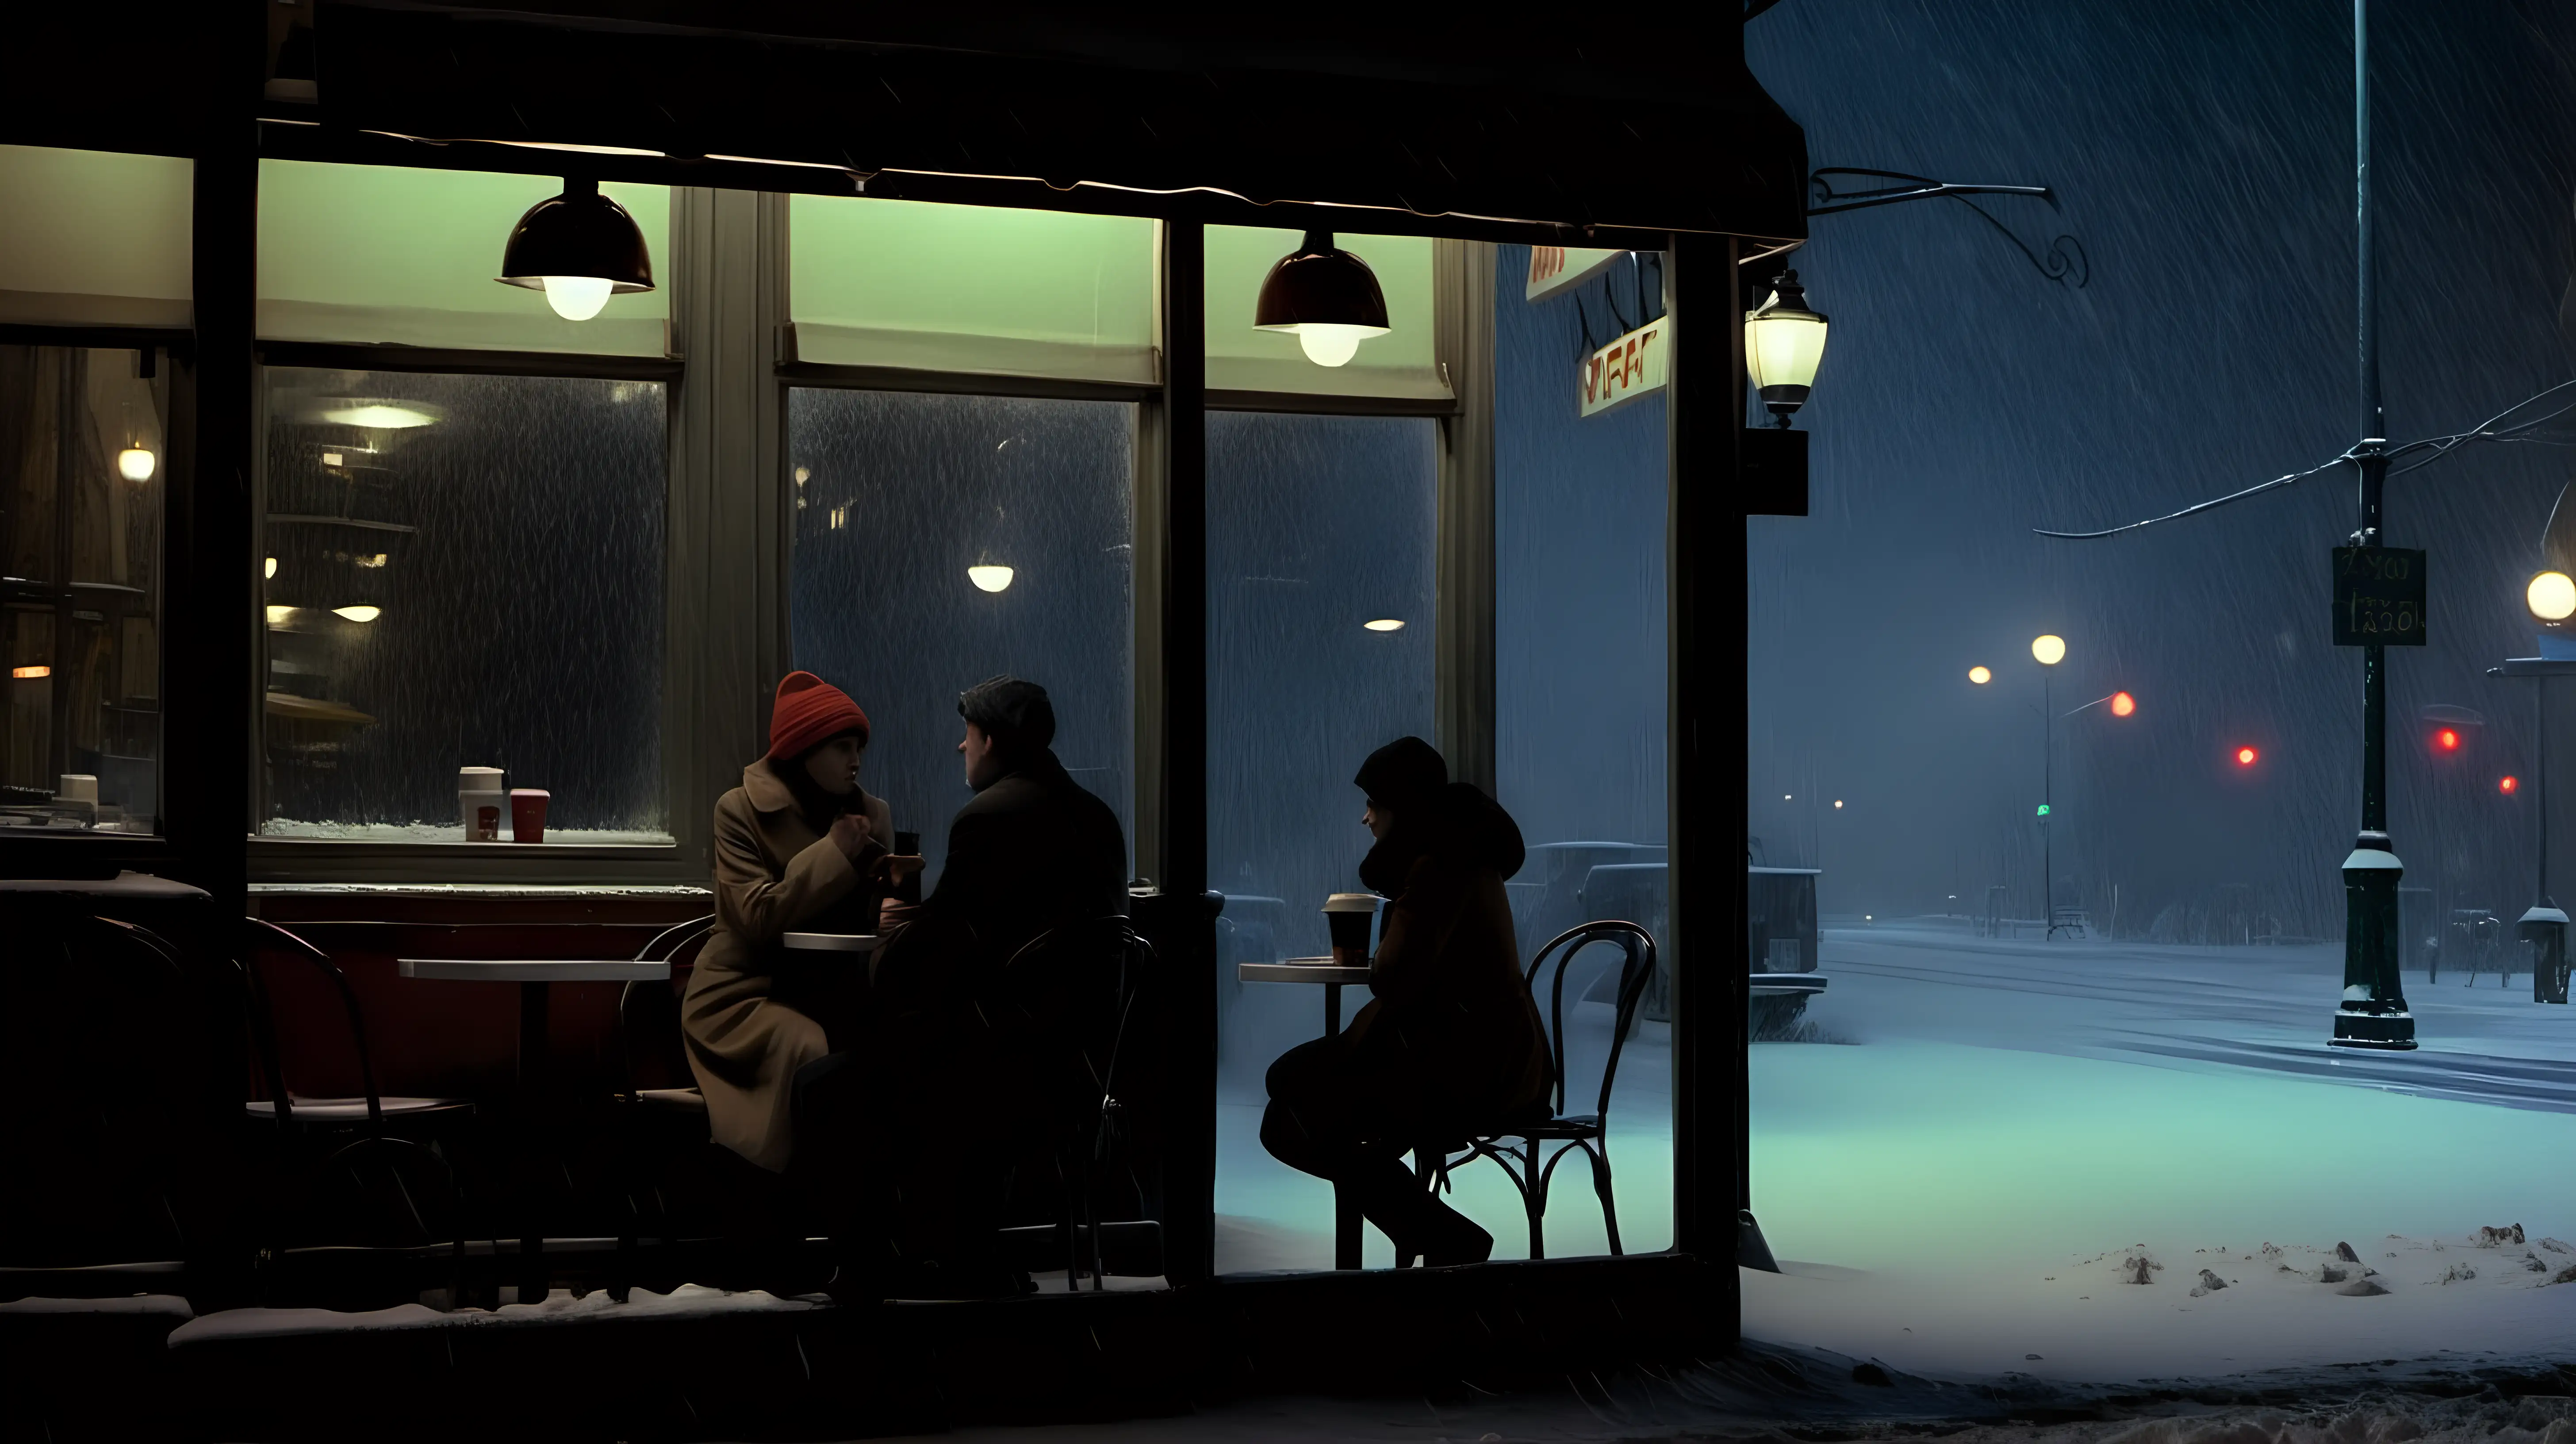 wide shot of a man and a woman sitting alone in a cafe at night during a snowstorm in NYC Edward Hopper style